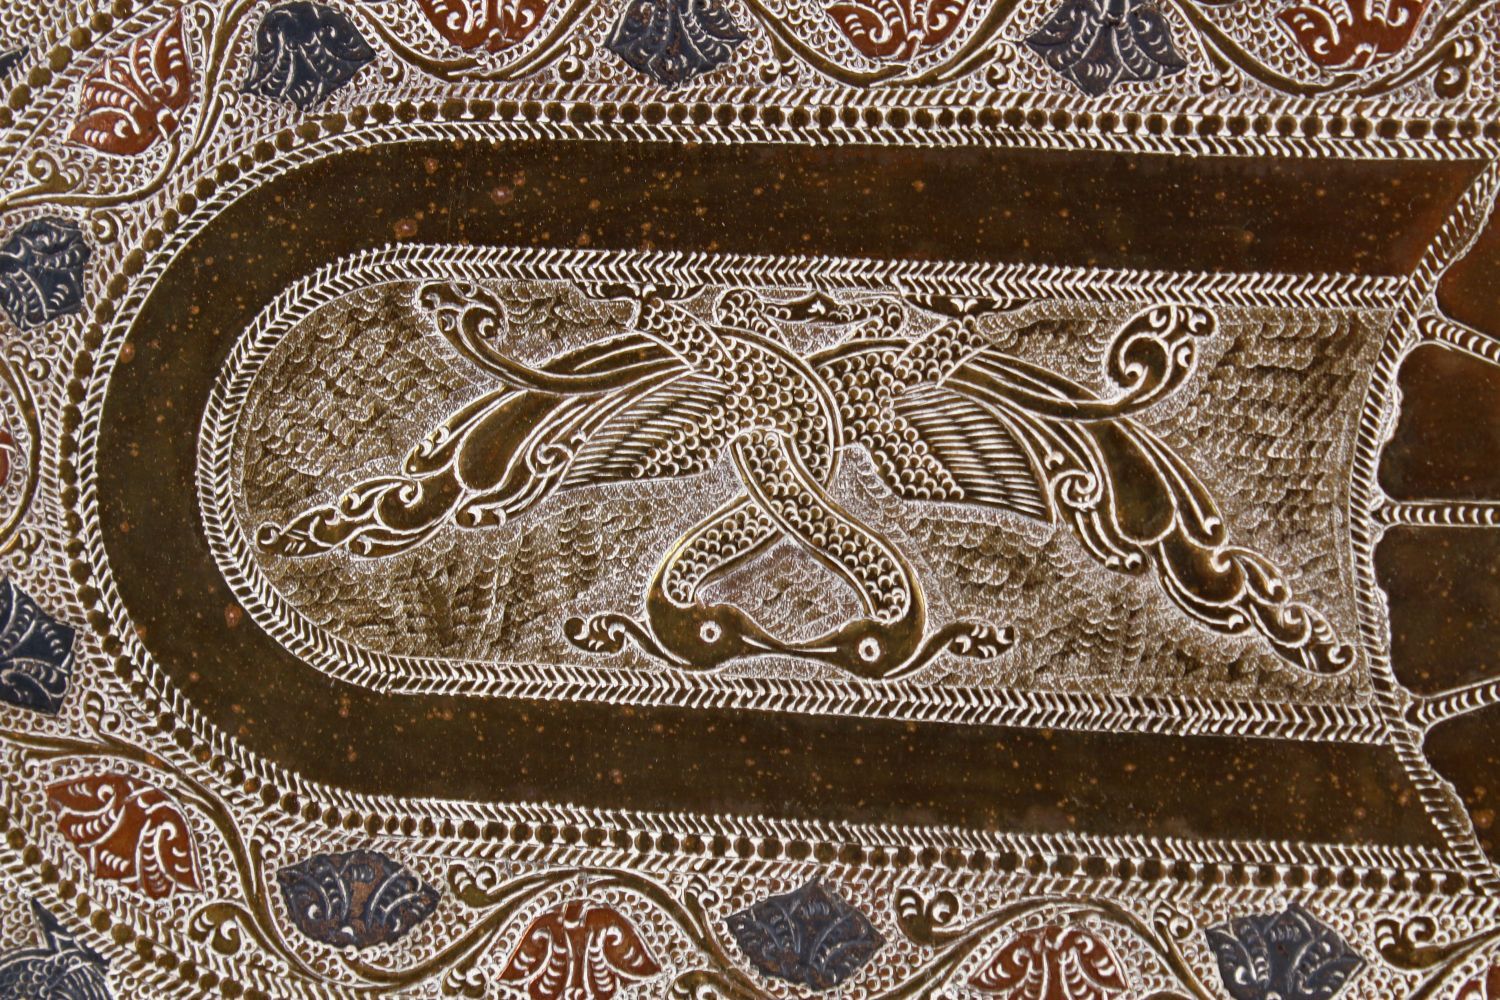 A FINE QUALITY 19TH CENTURY SRI LANKAN SILVER INLAID TRAY, inlaid with scenes of birds, with - Image 3 of 6